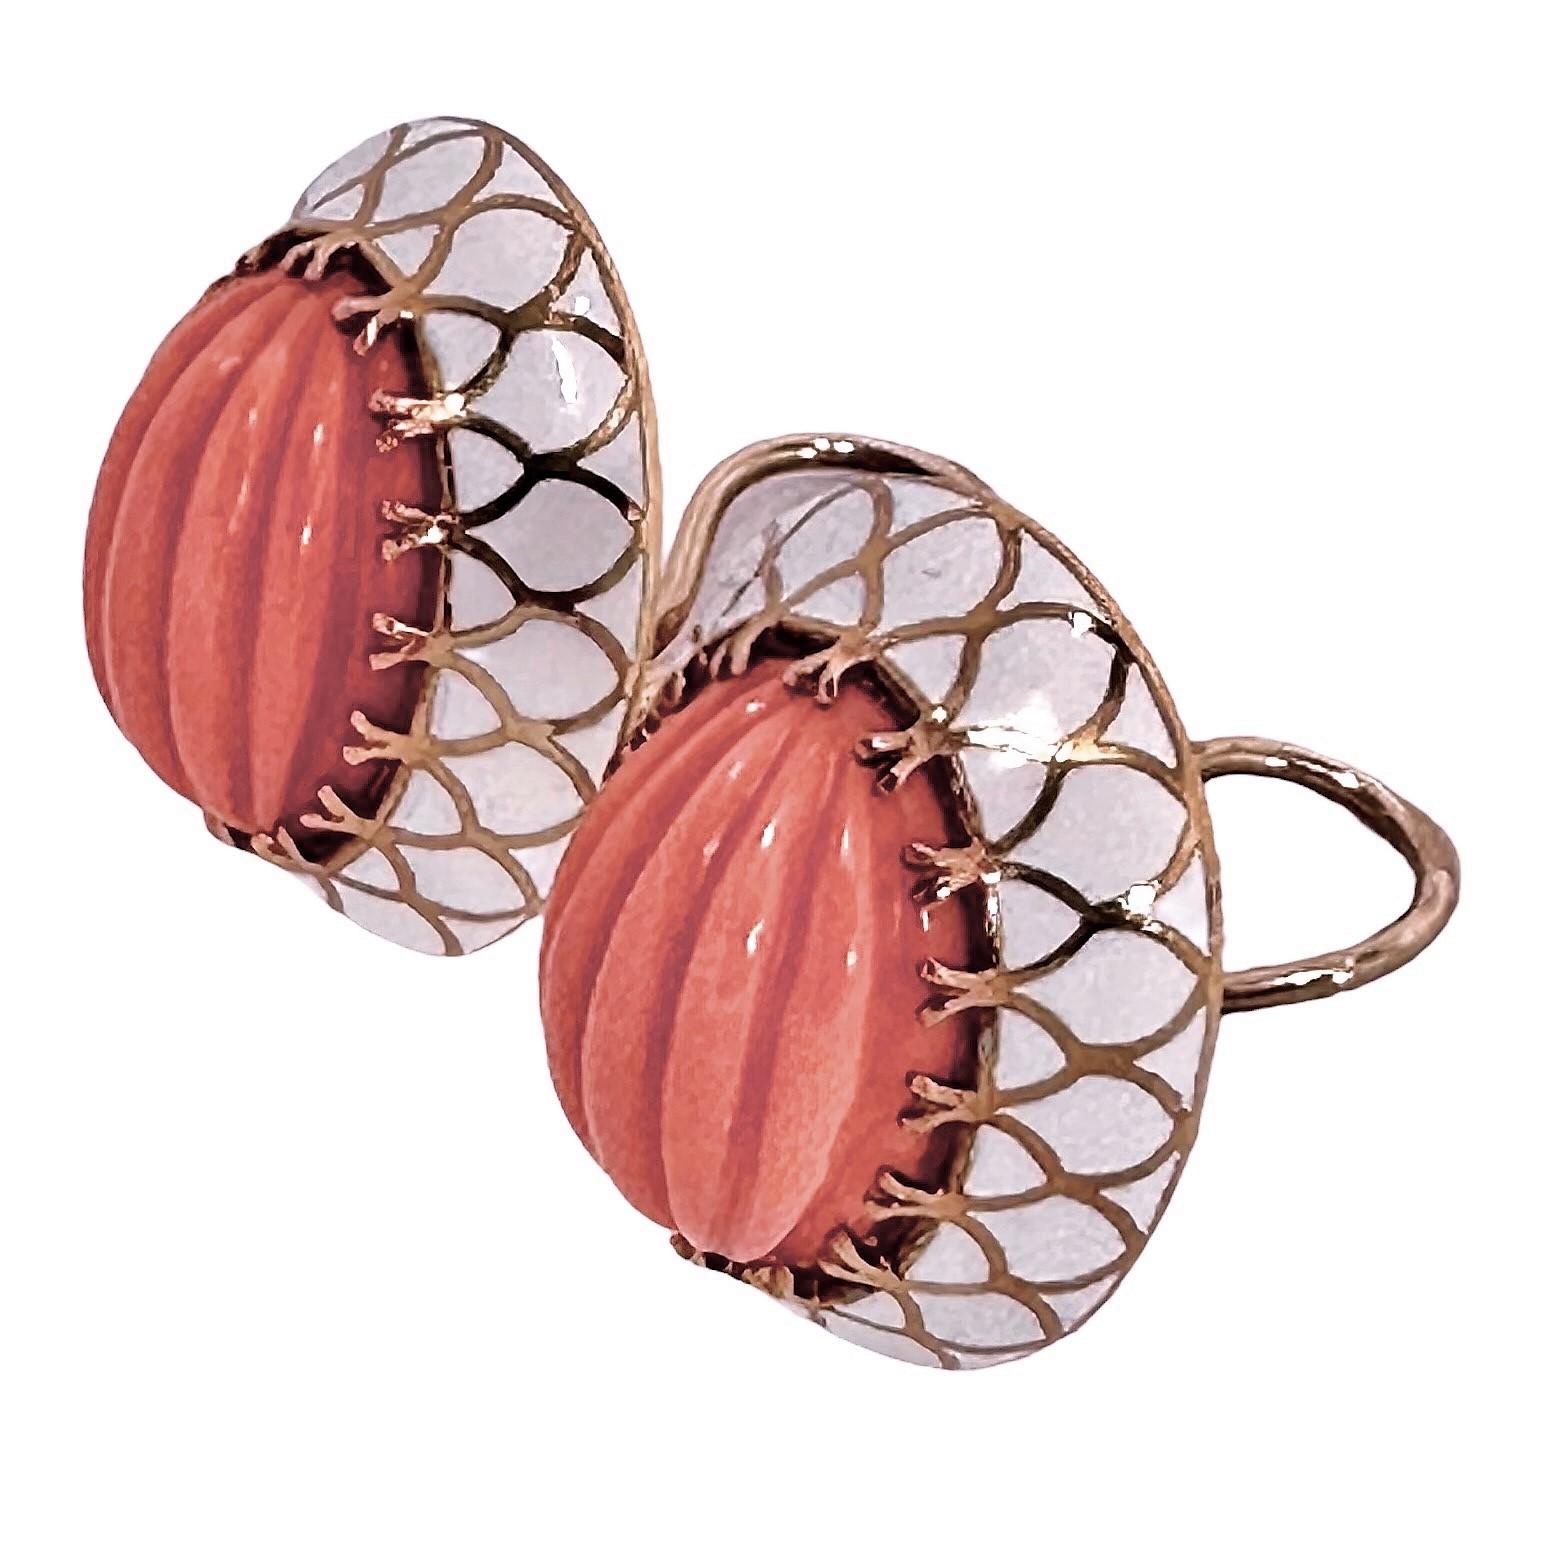 18k Yellow Gold, Salmon Color Coral and White Enamel Earrings - Great for Summer In Good Condition For Sale In Palm Beach, FL